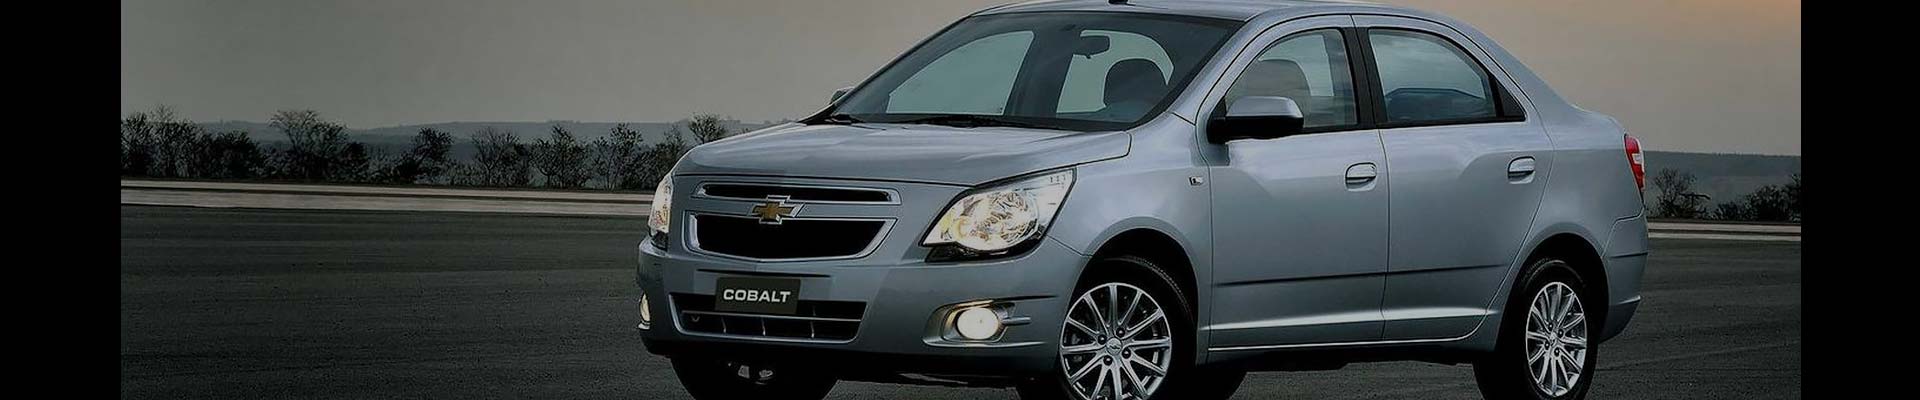 Shop Replacement and OEM Chevrolet Cobalt Parts with Discounted Price on the Net